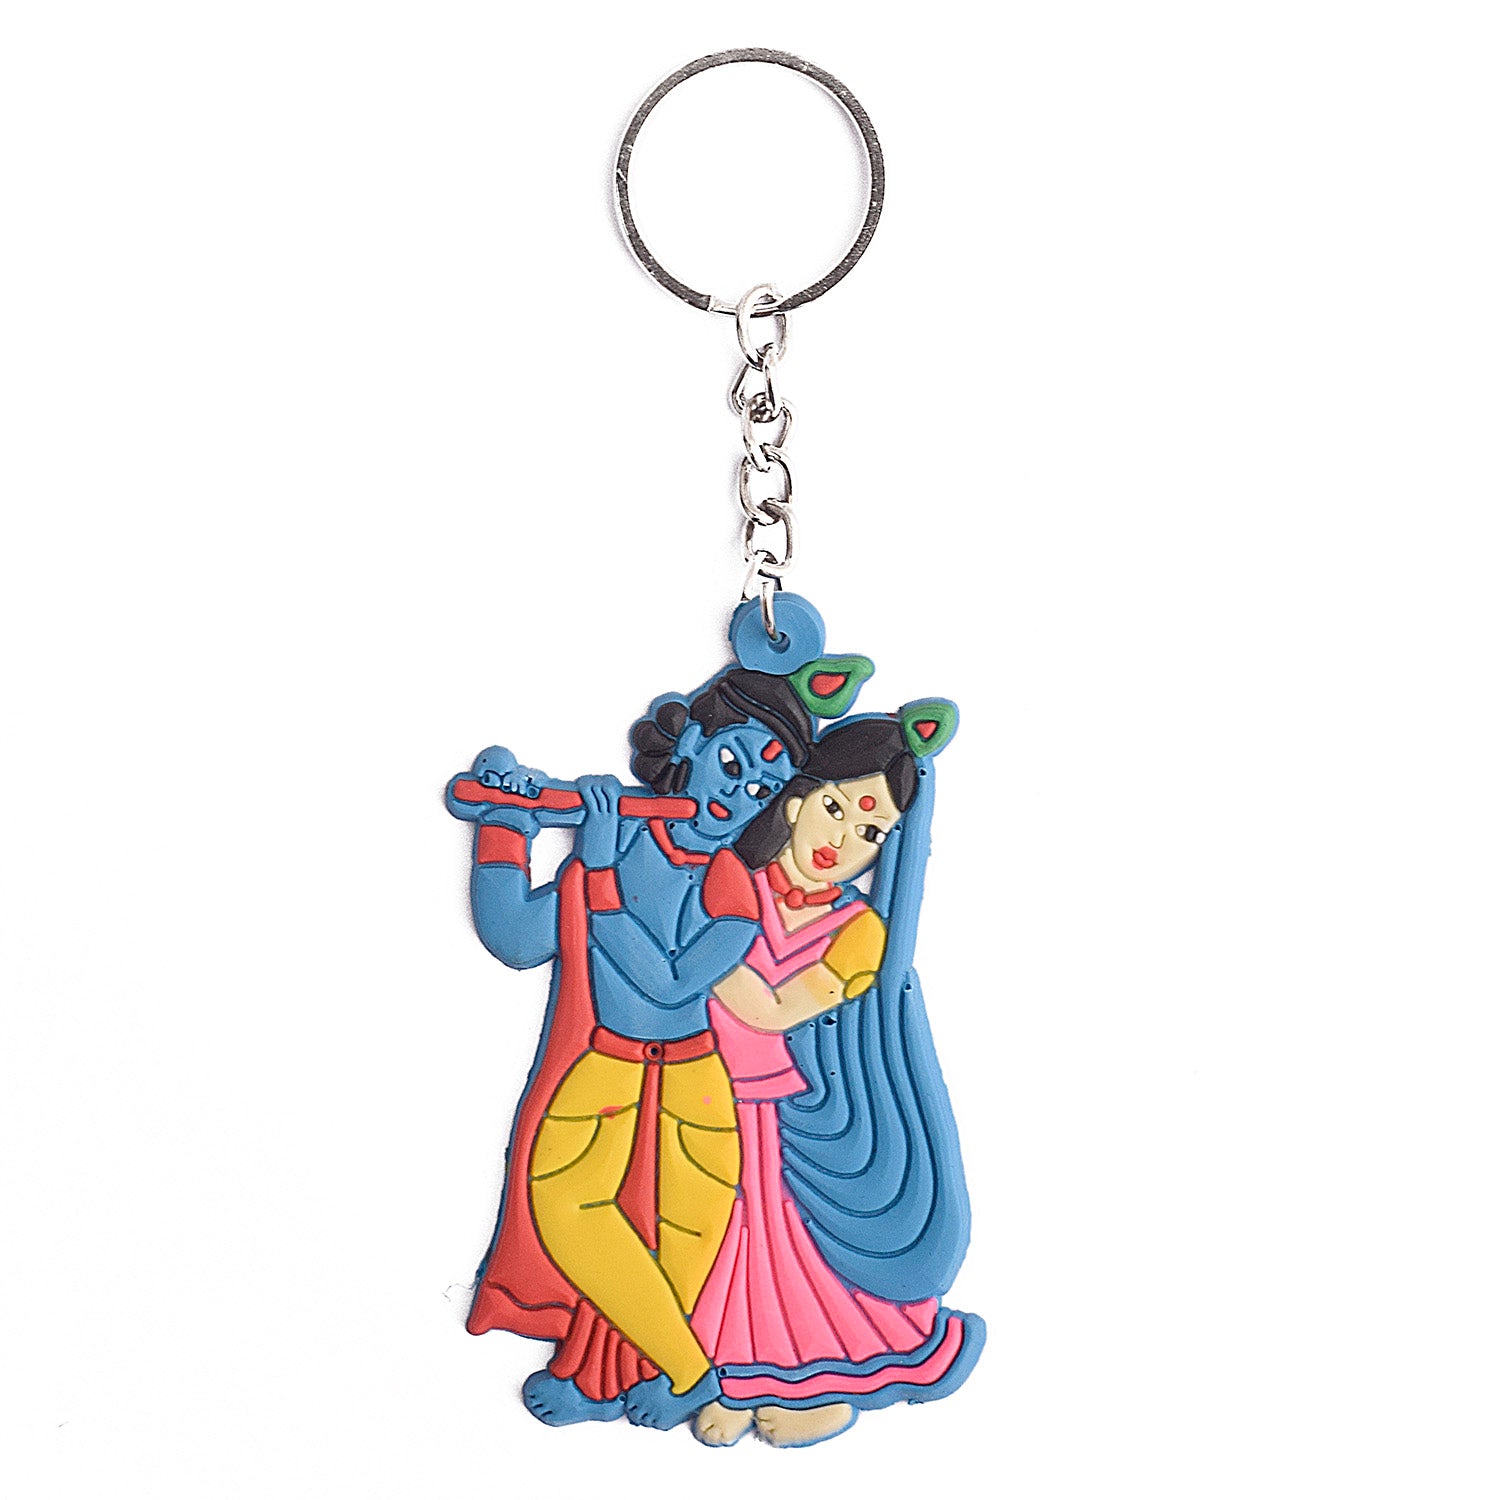 Brass Key Ring at Rs 150 in New Delhi